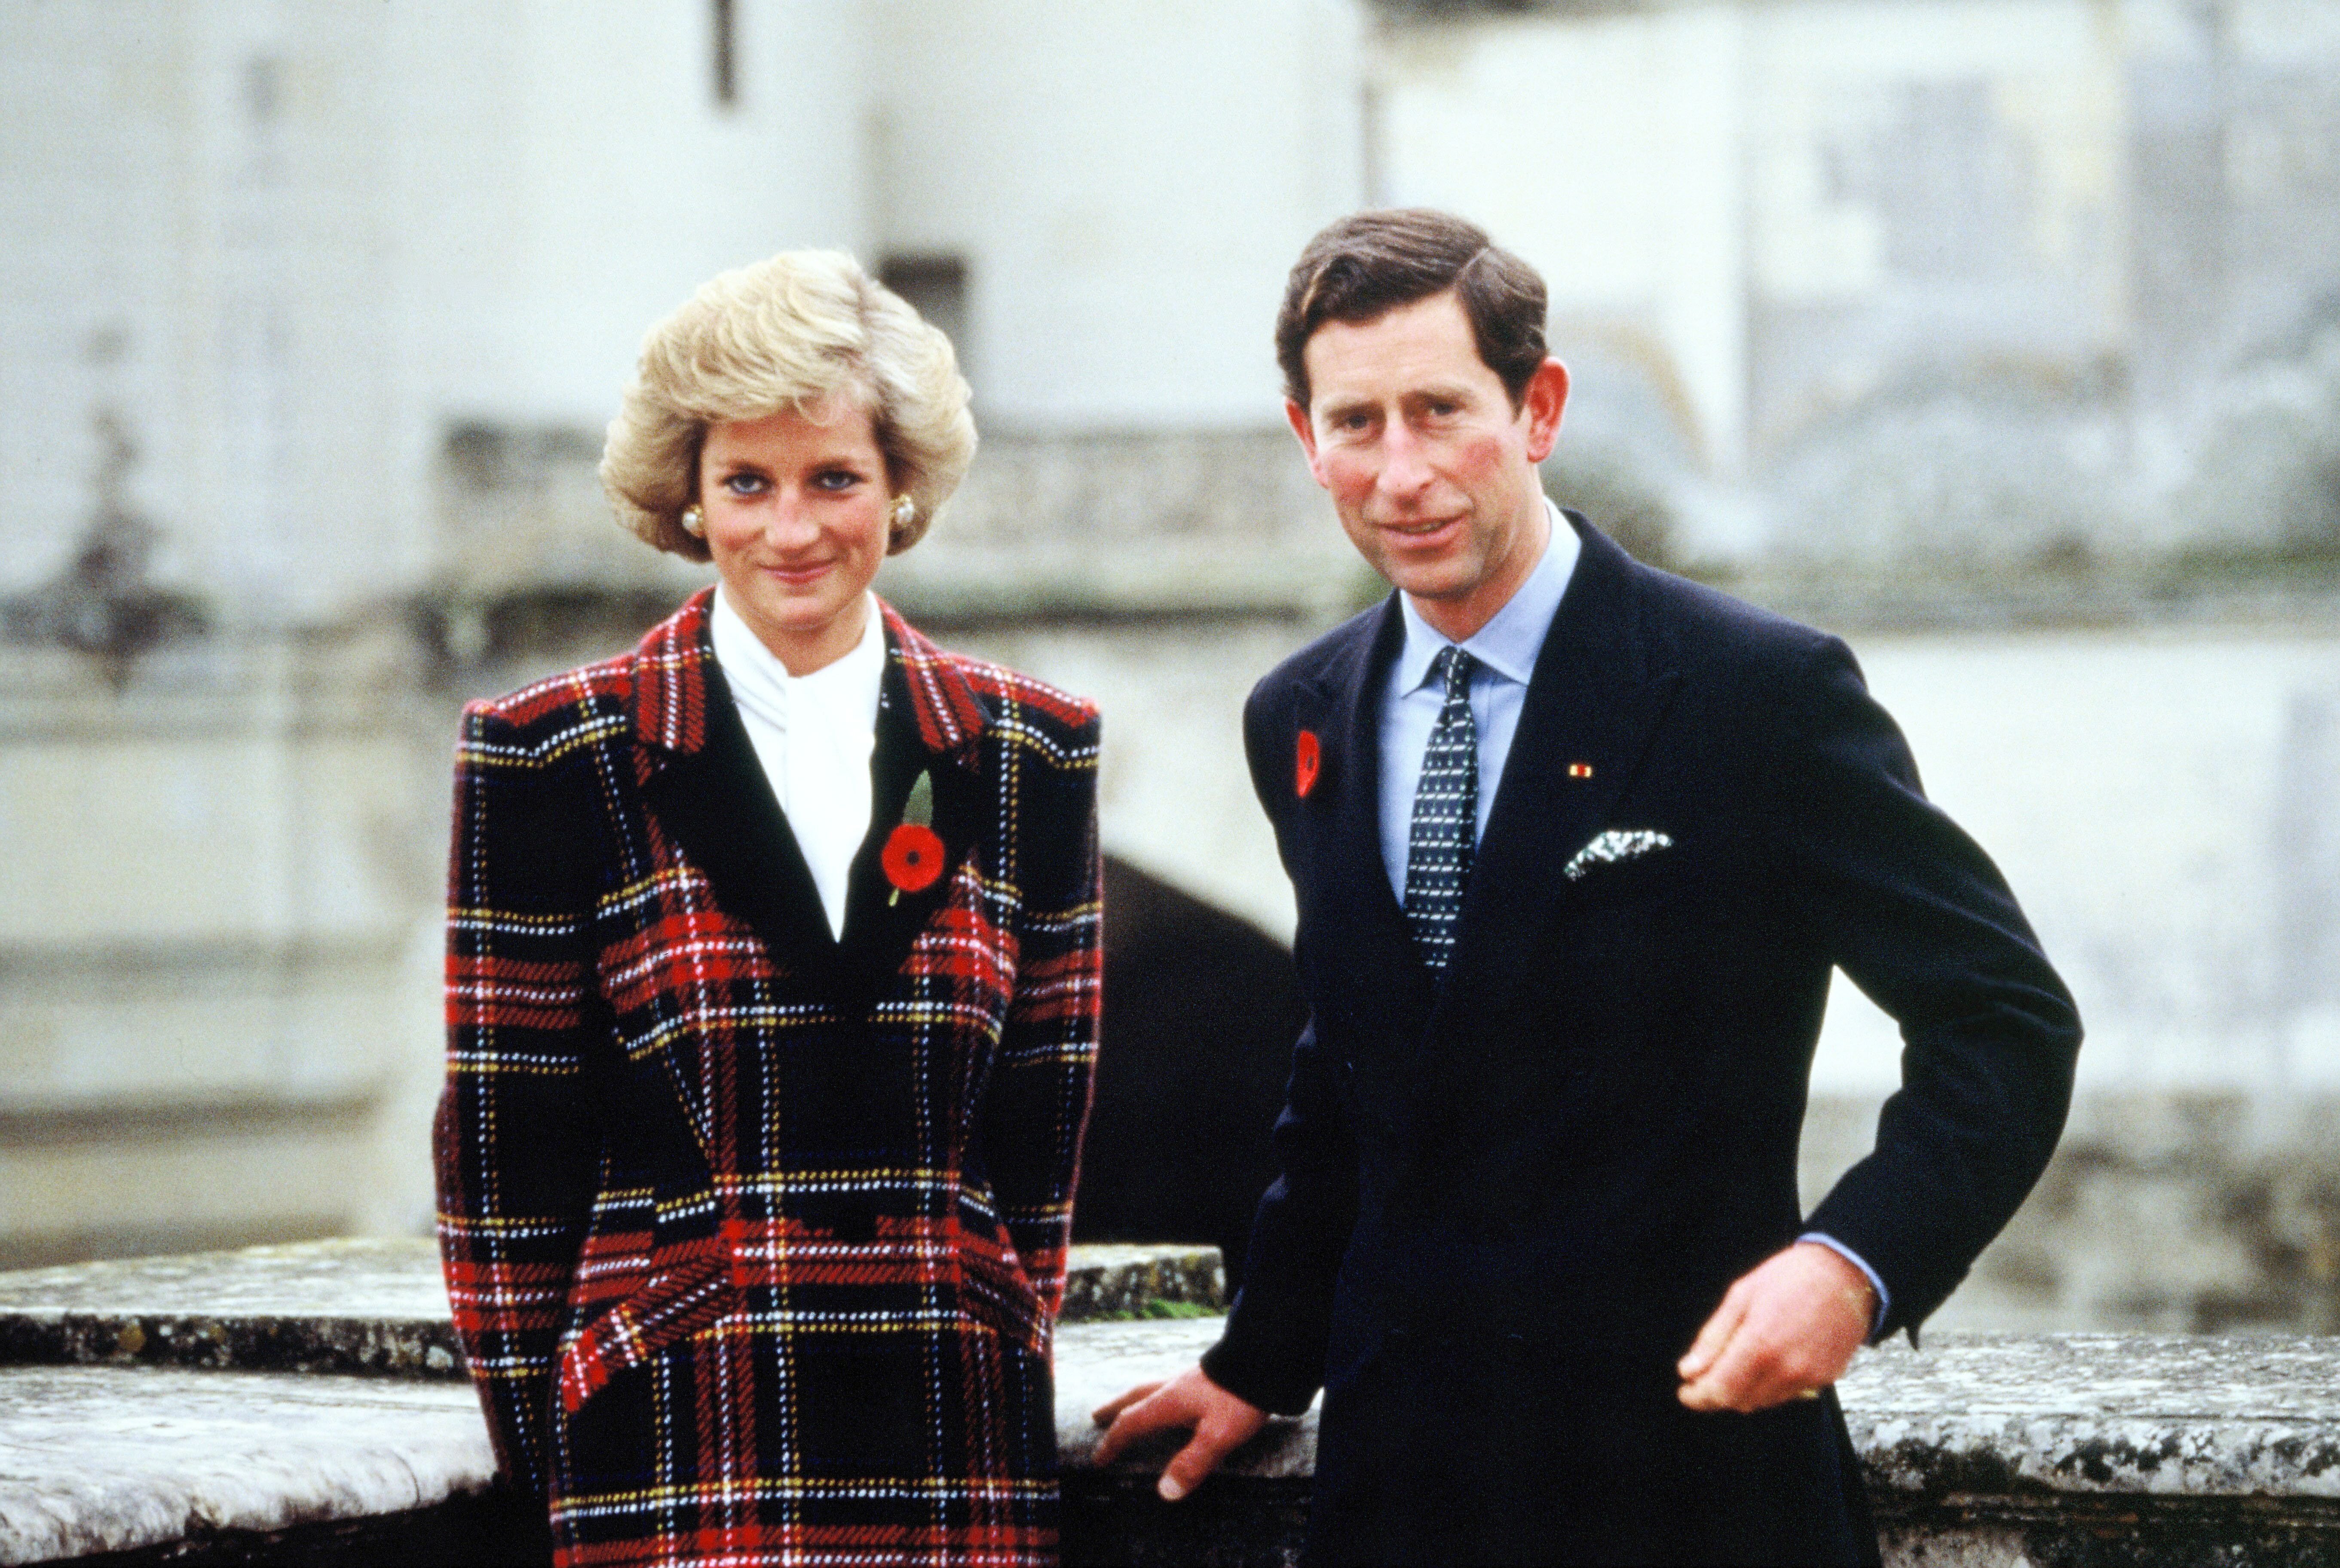 Prince Charles and Princess Diana pose outside Chateau de Chambord on November 9, 1988. | Photo: Getty Images